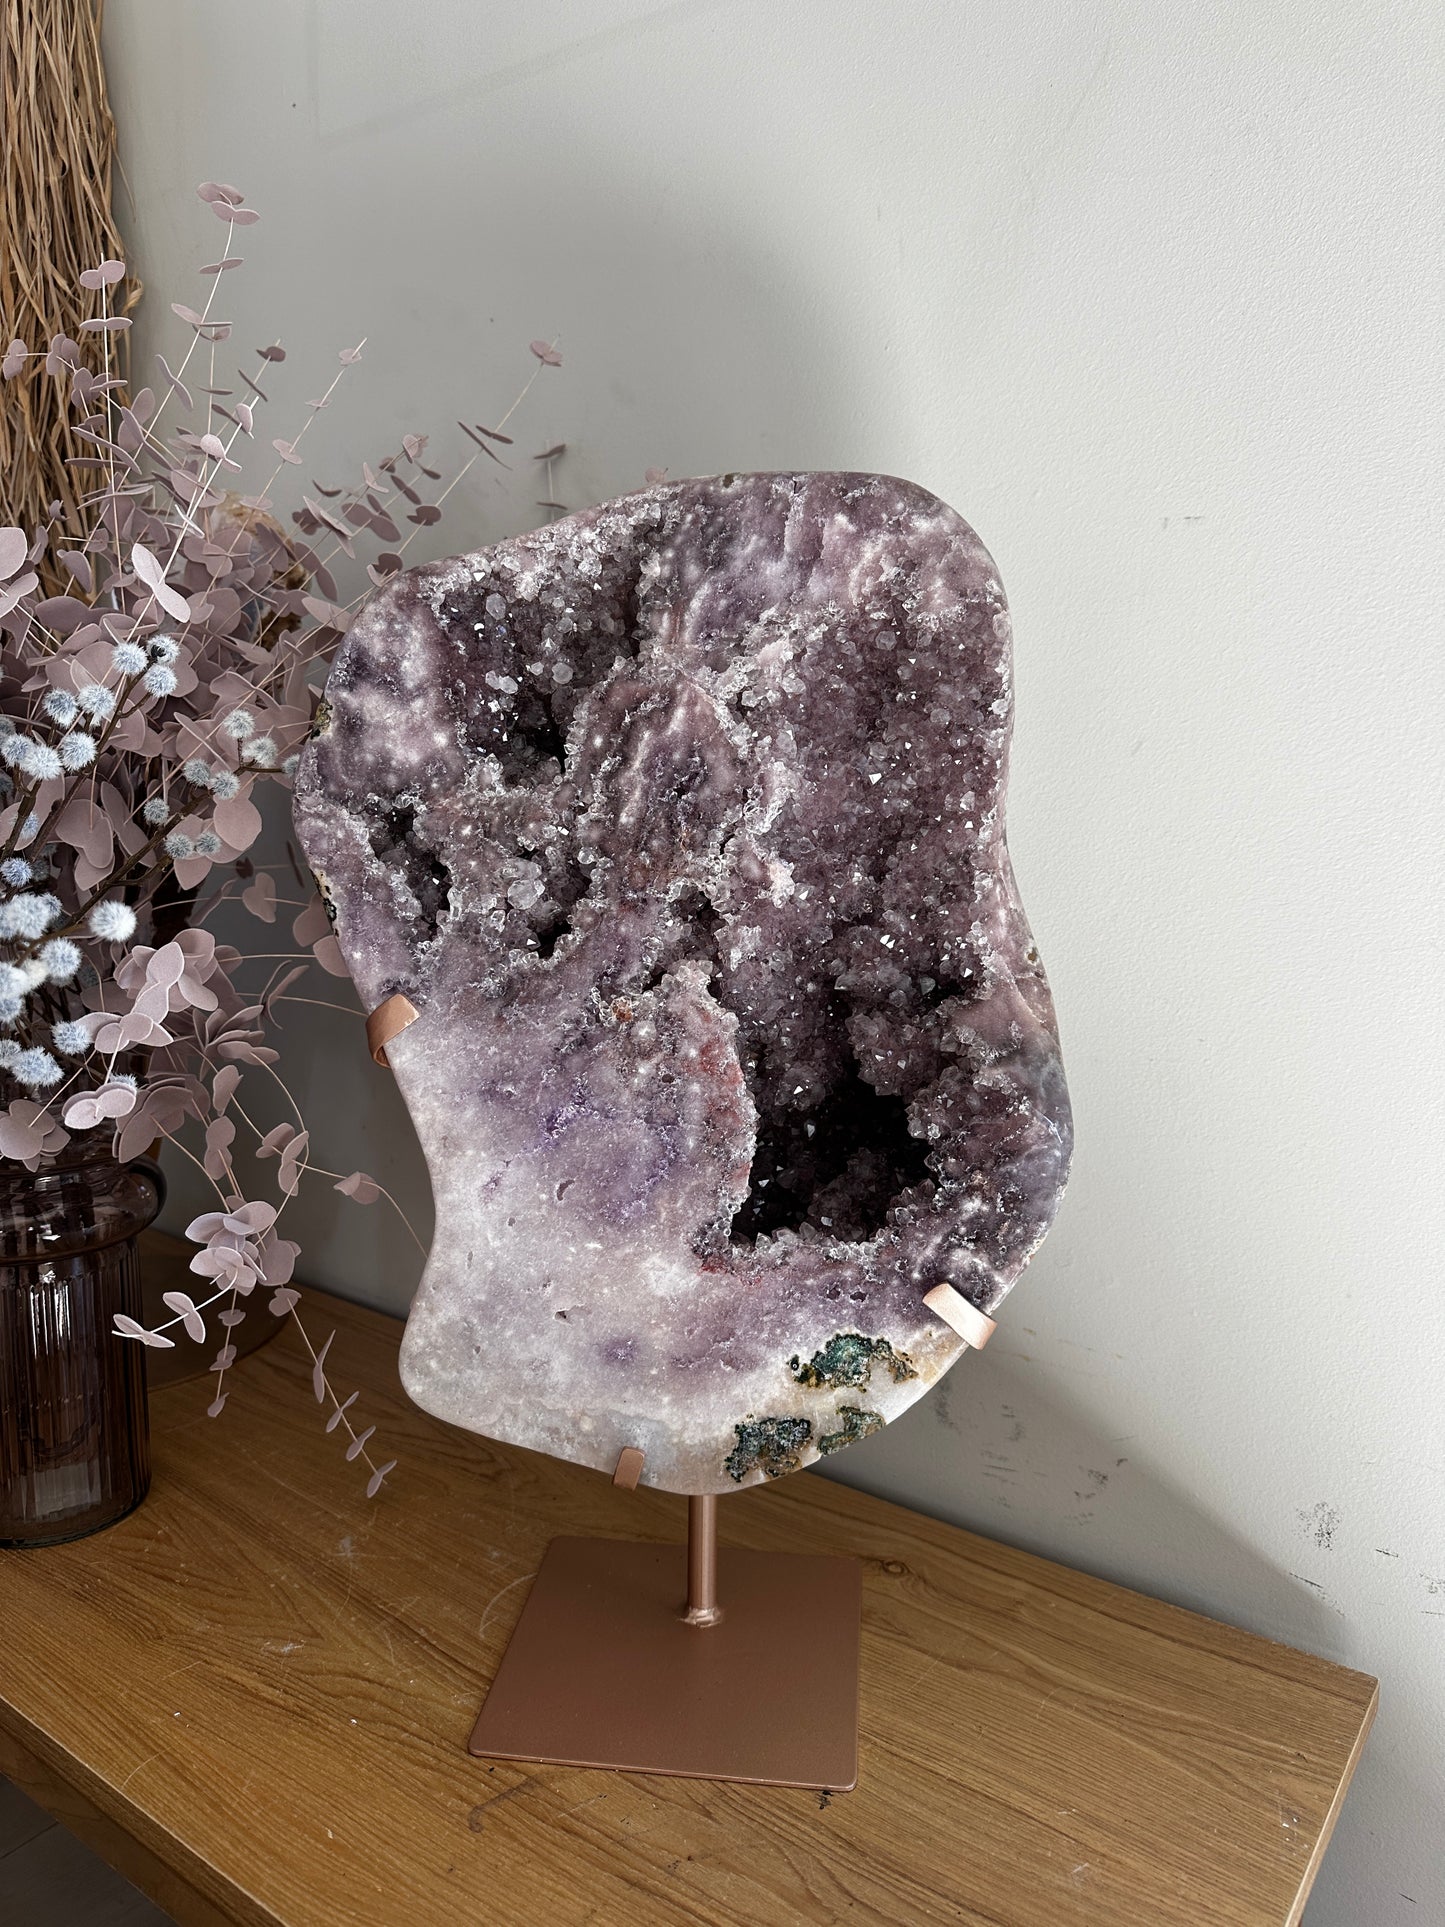 Extra Grade Large Pink Amethyst Slab on stand